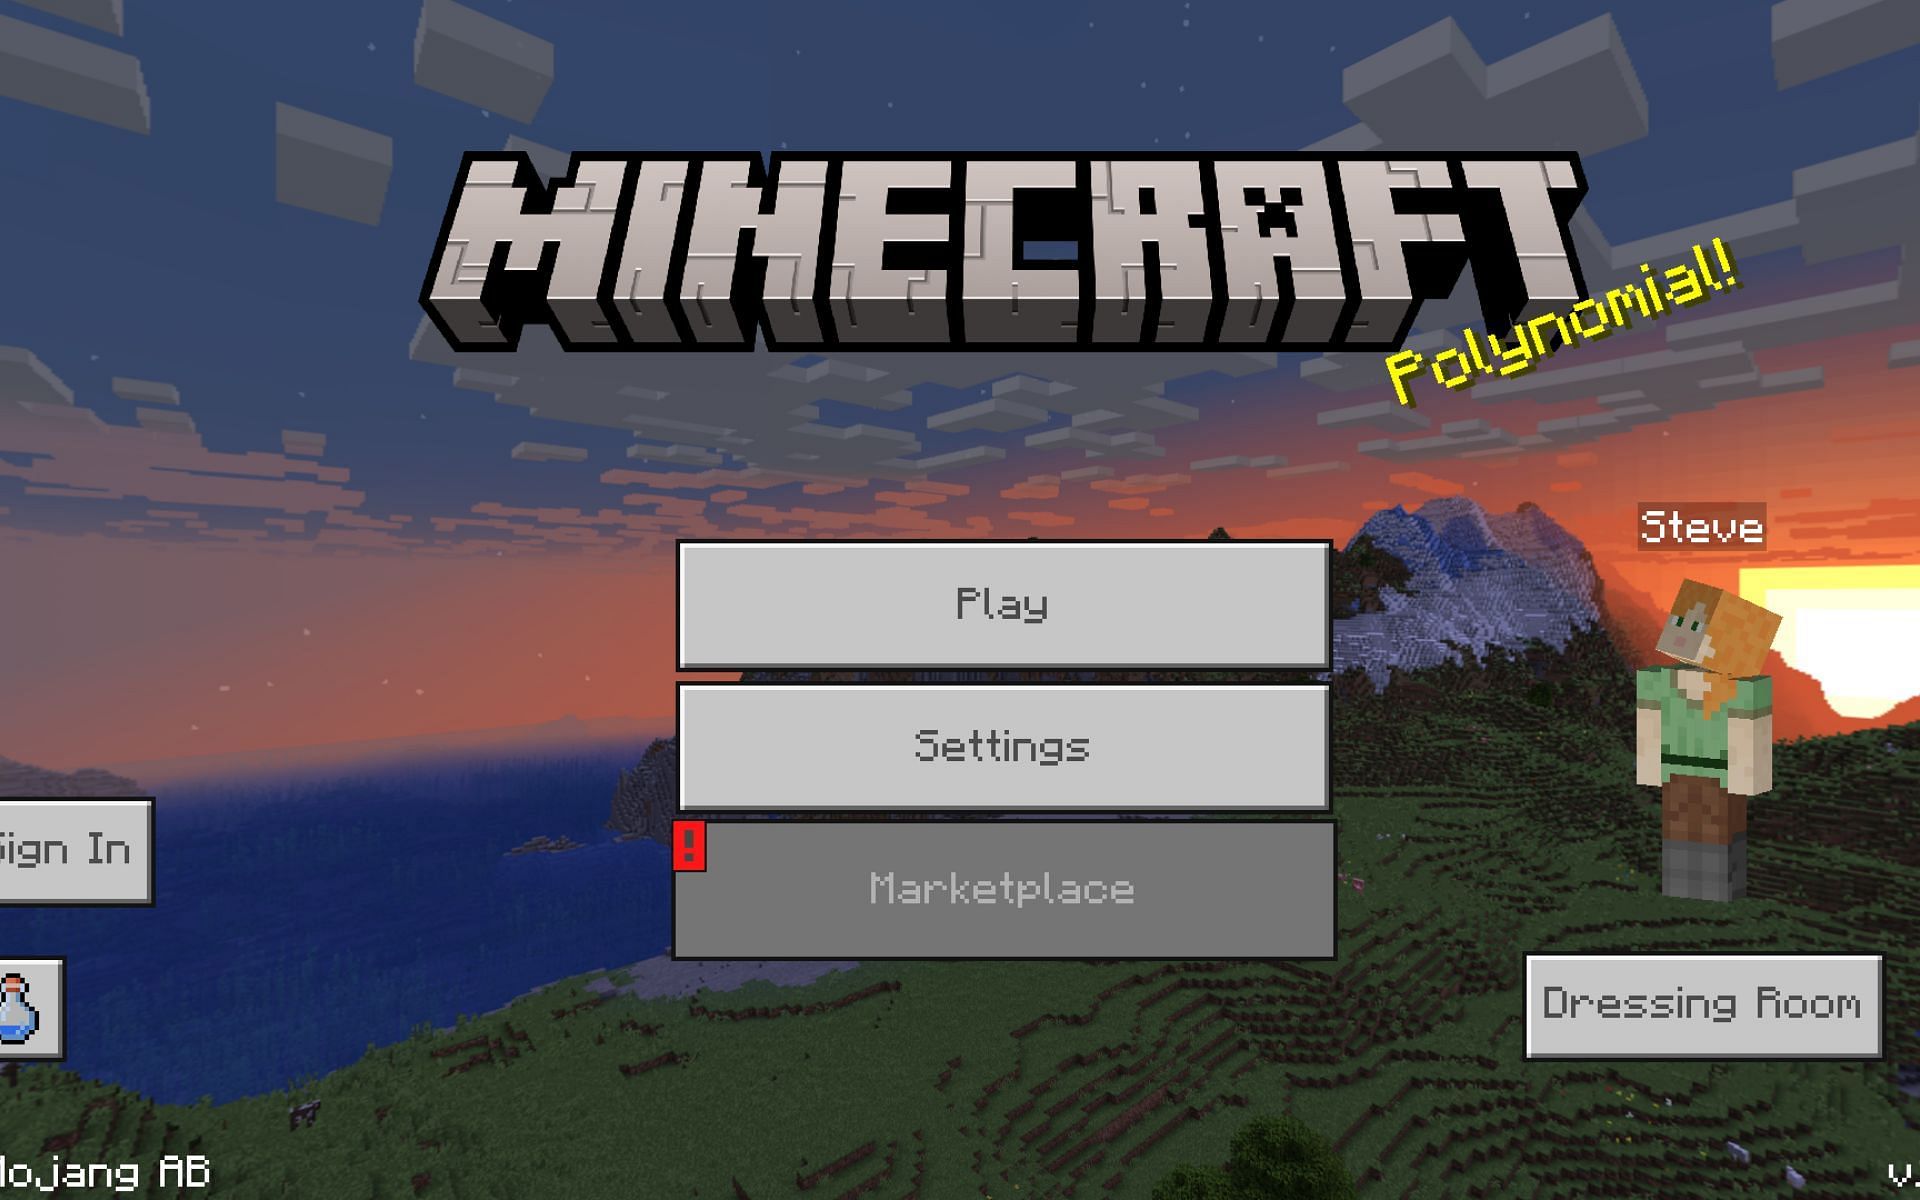 How to download Minecraft Bedrock Edition on Windows 11: A step-by